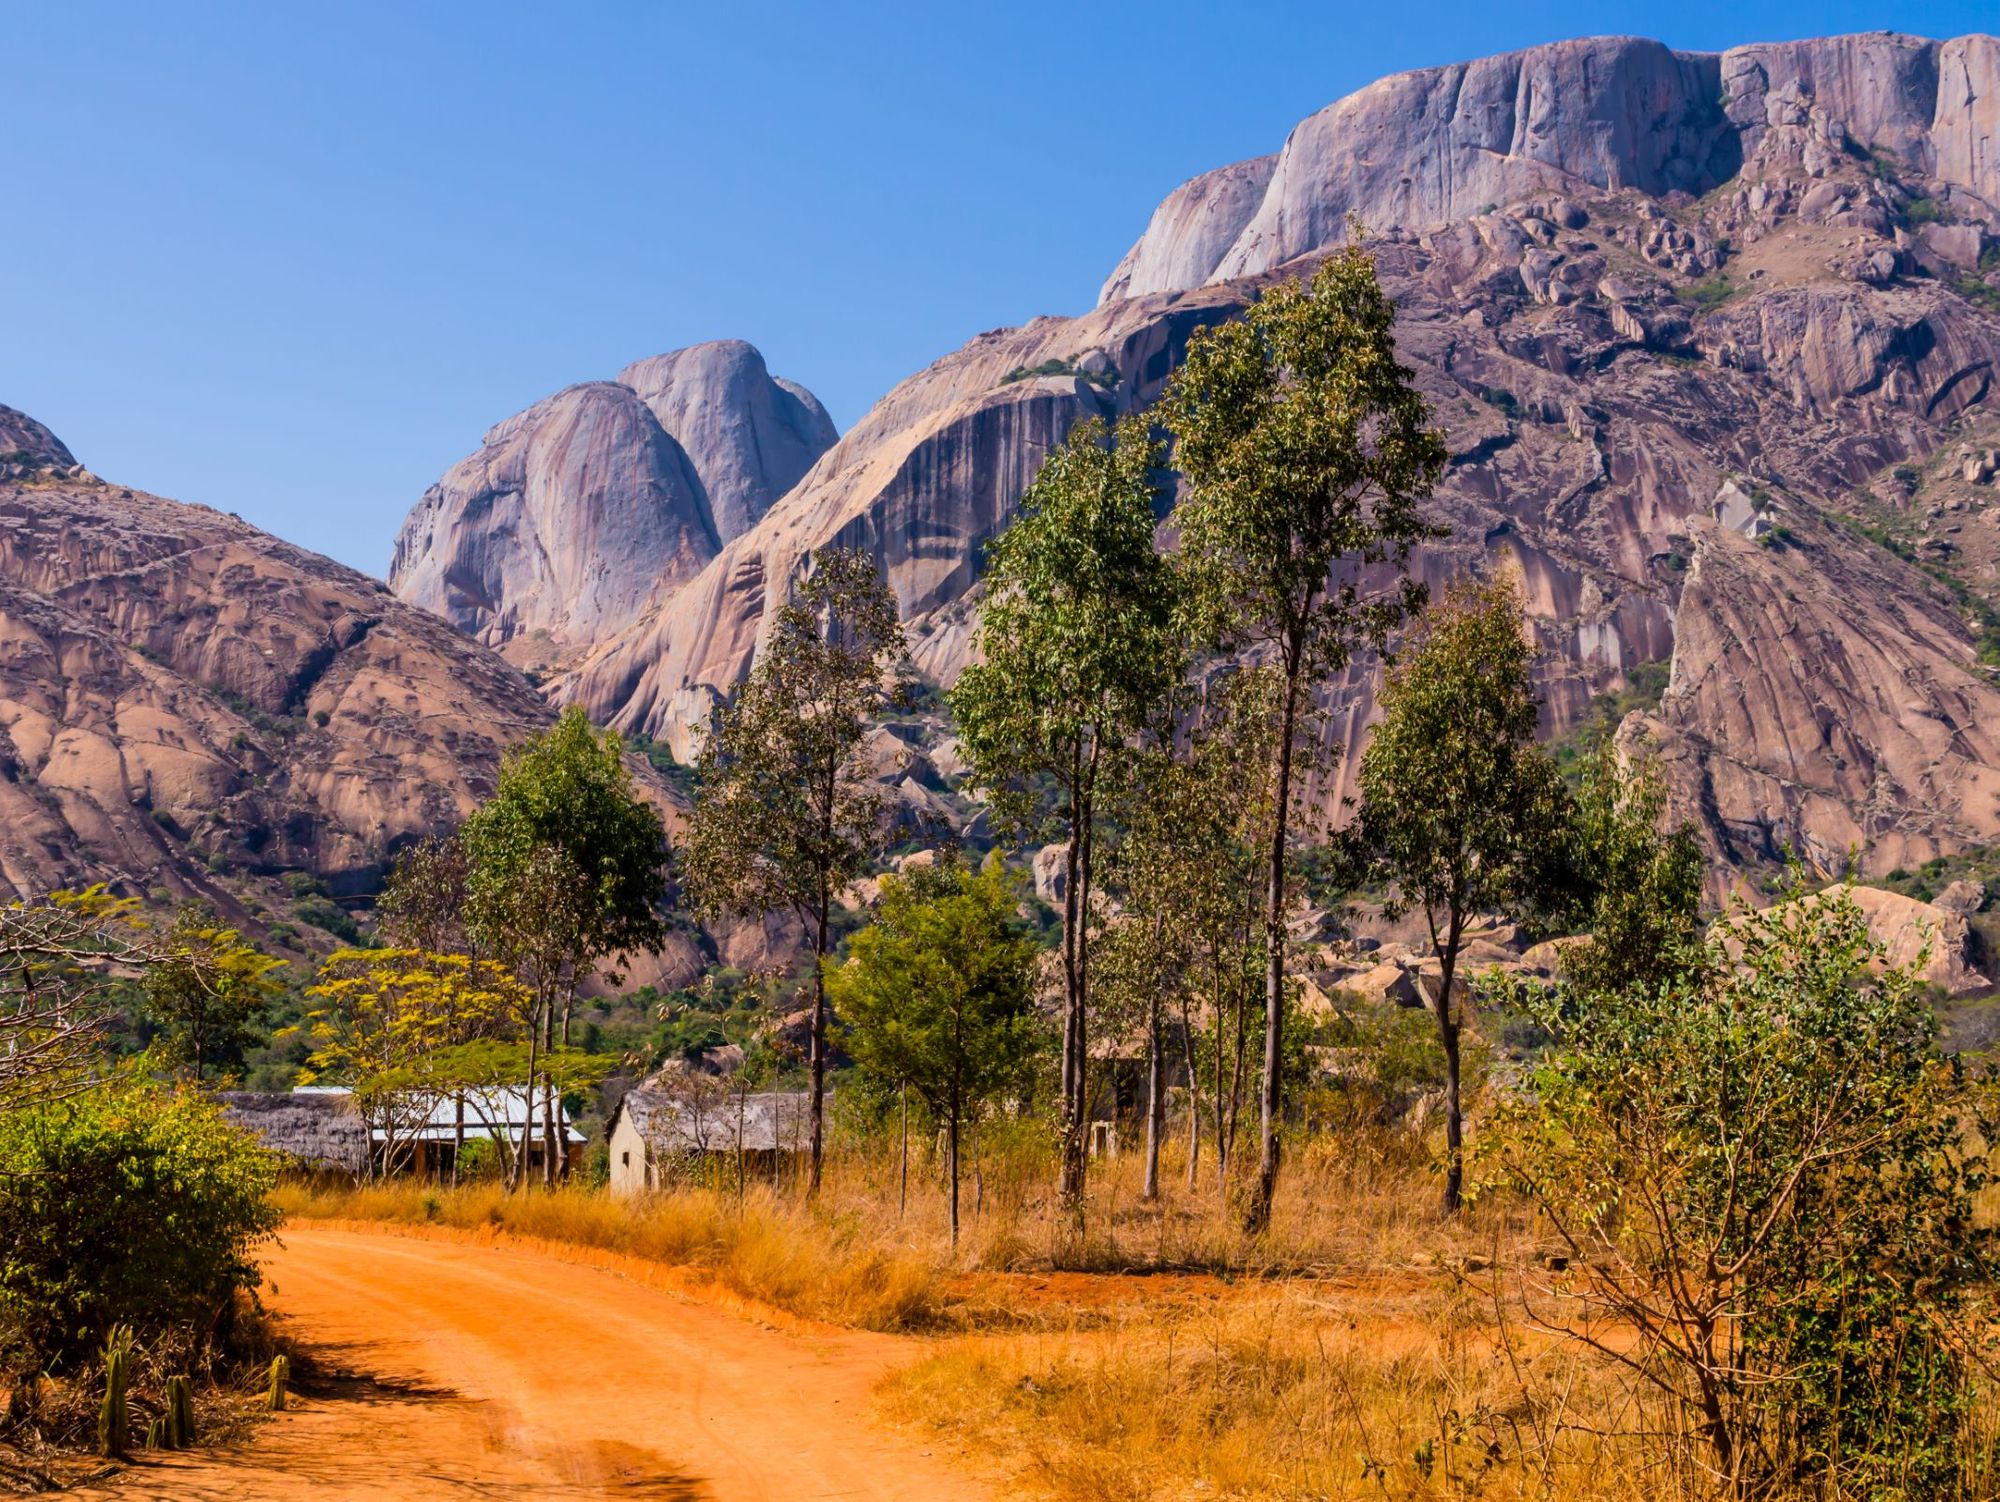 The granite mountains of Anja community reserve rise up behind the houses and trees. Photo: Getty